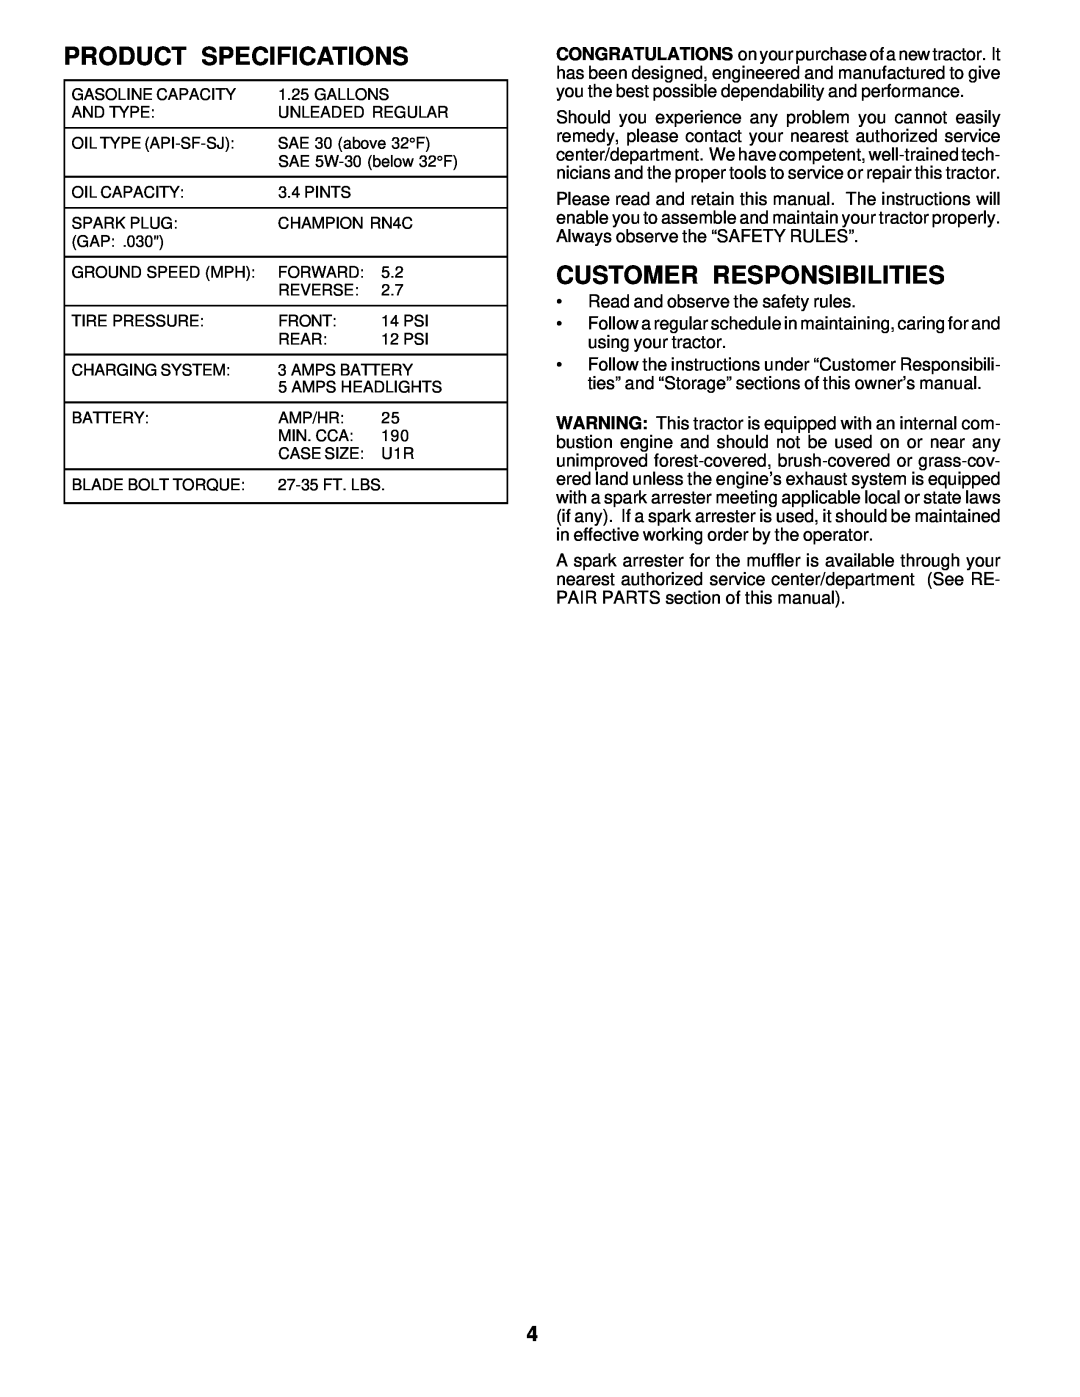 Weed Eater 177019 manual Product Specifications, Customer Responsibilities 